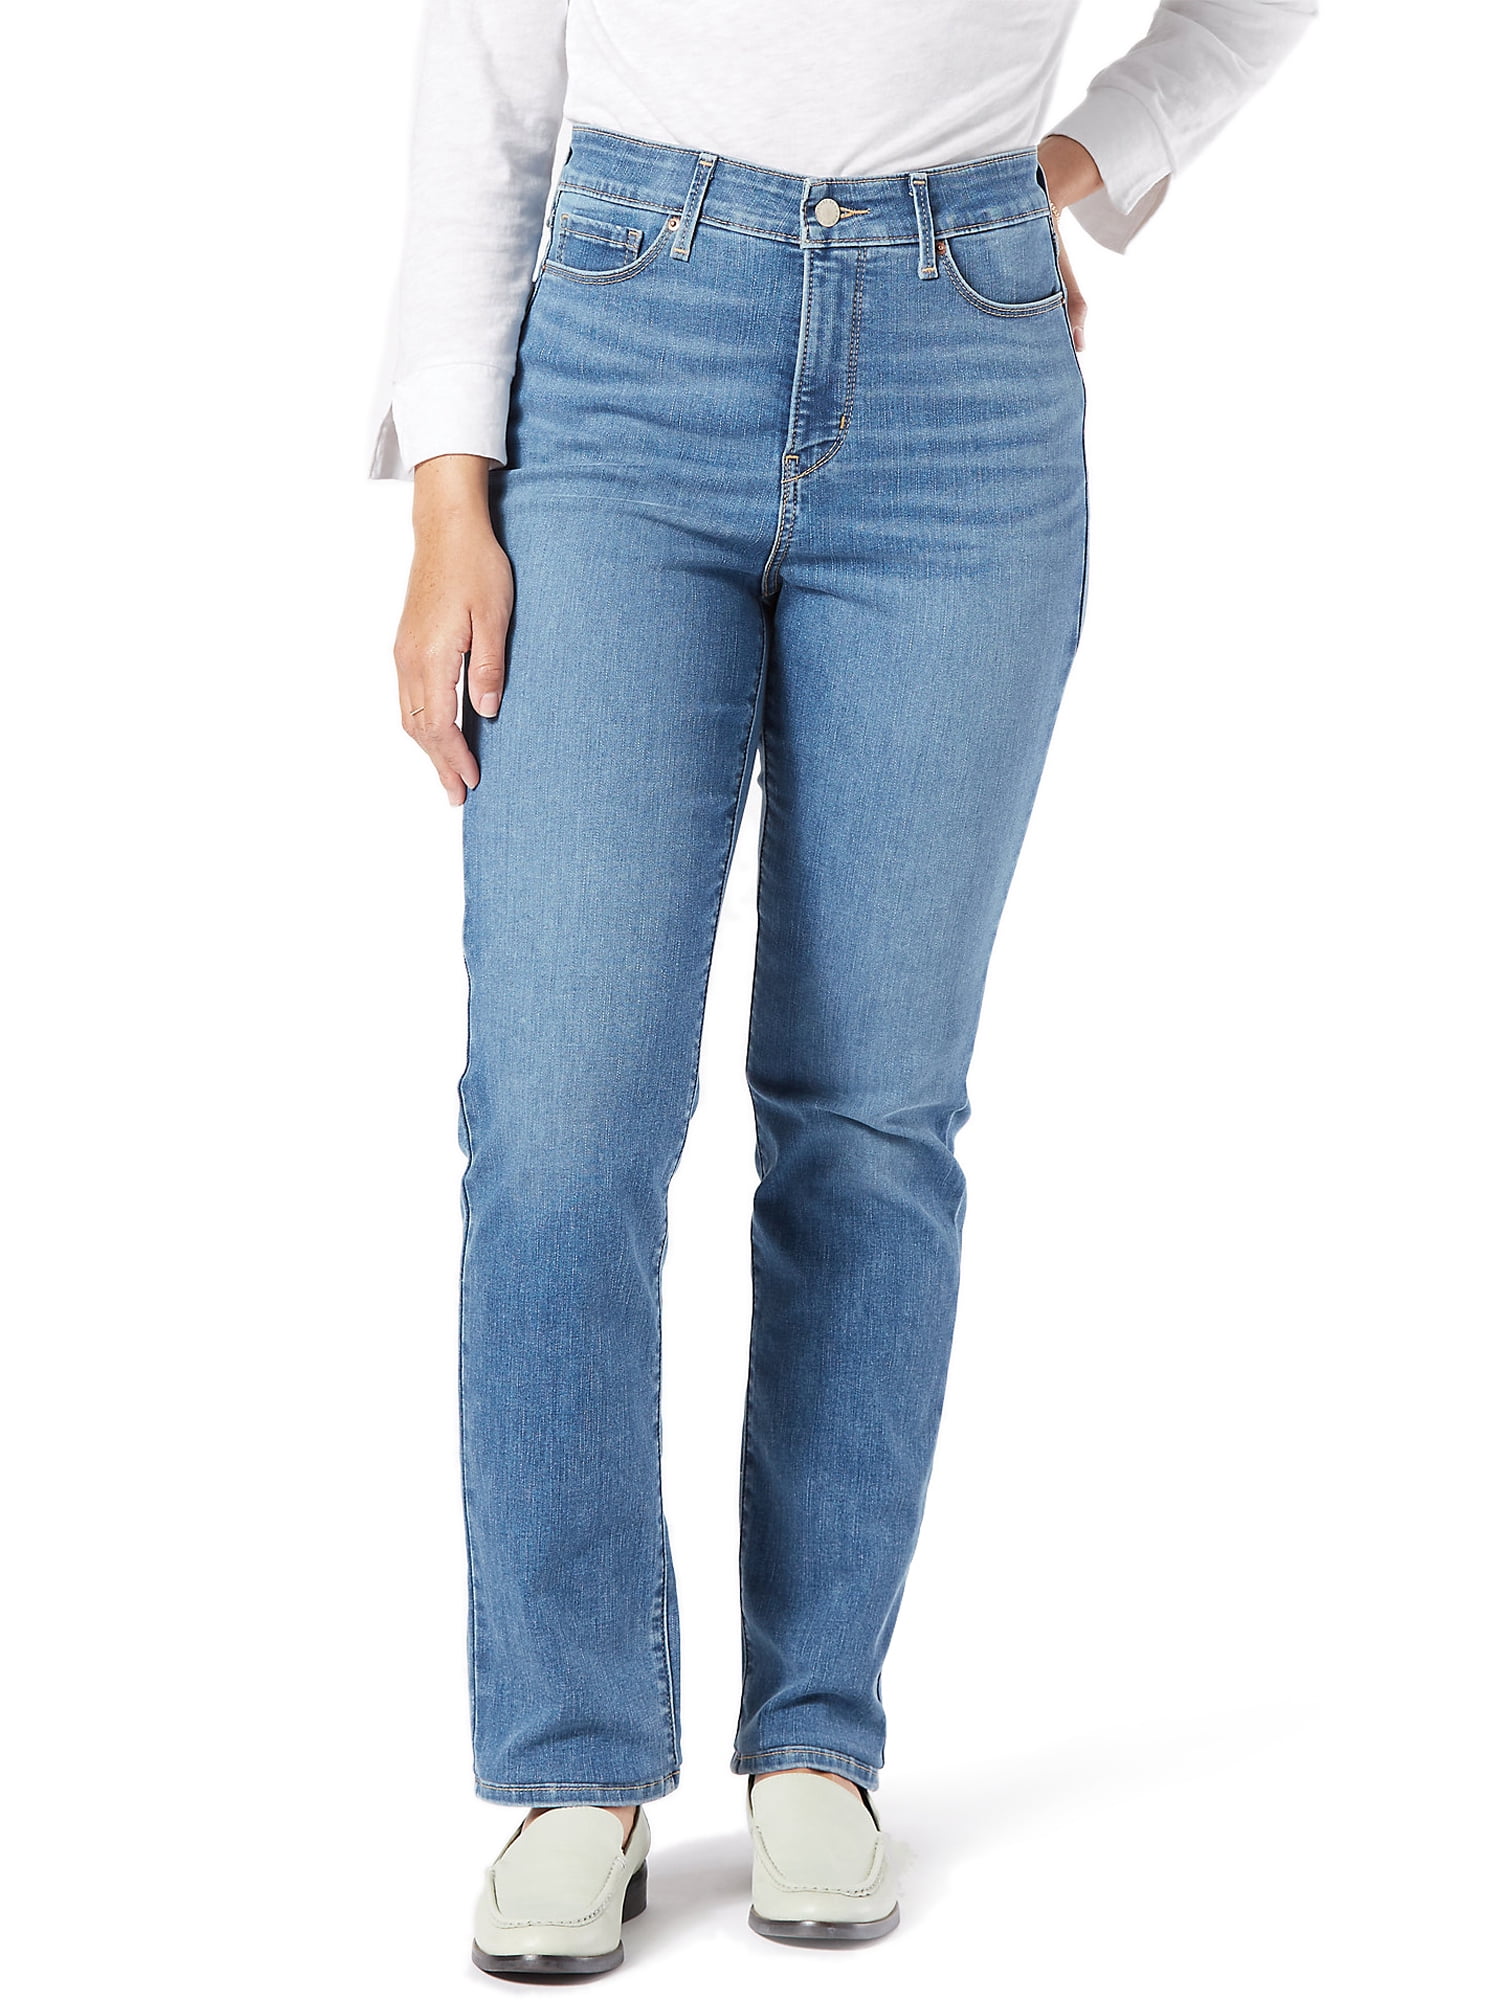 Buy Levis Jeans Womens online | Lazada.com.ph-sonthuy.vn